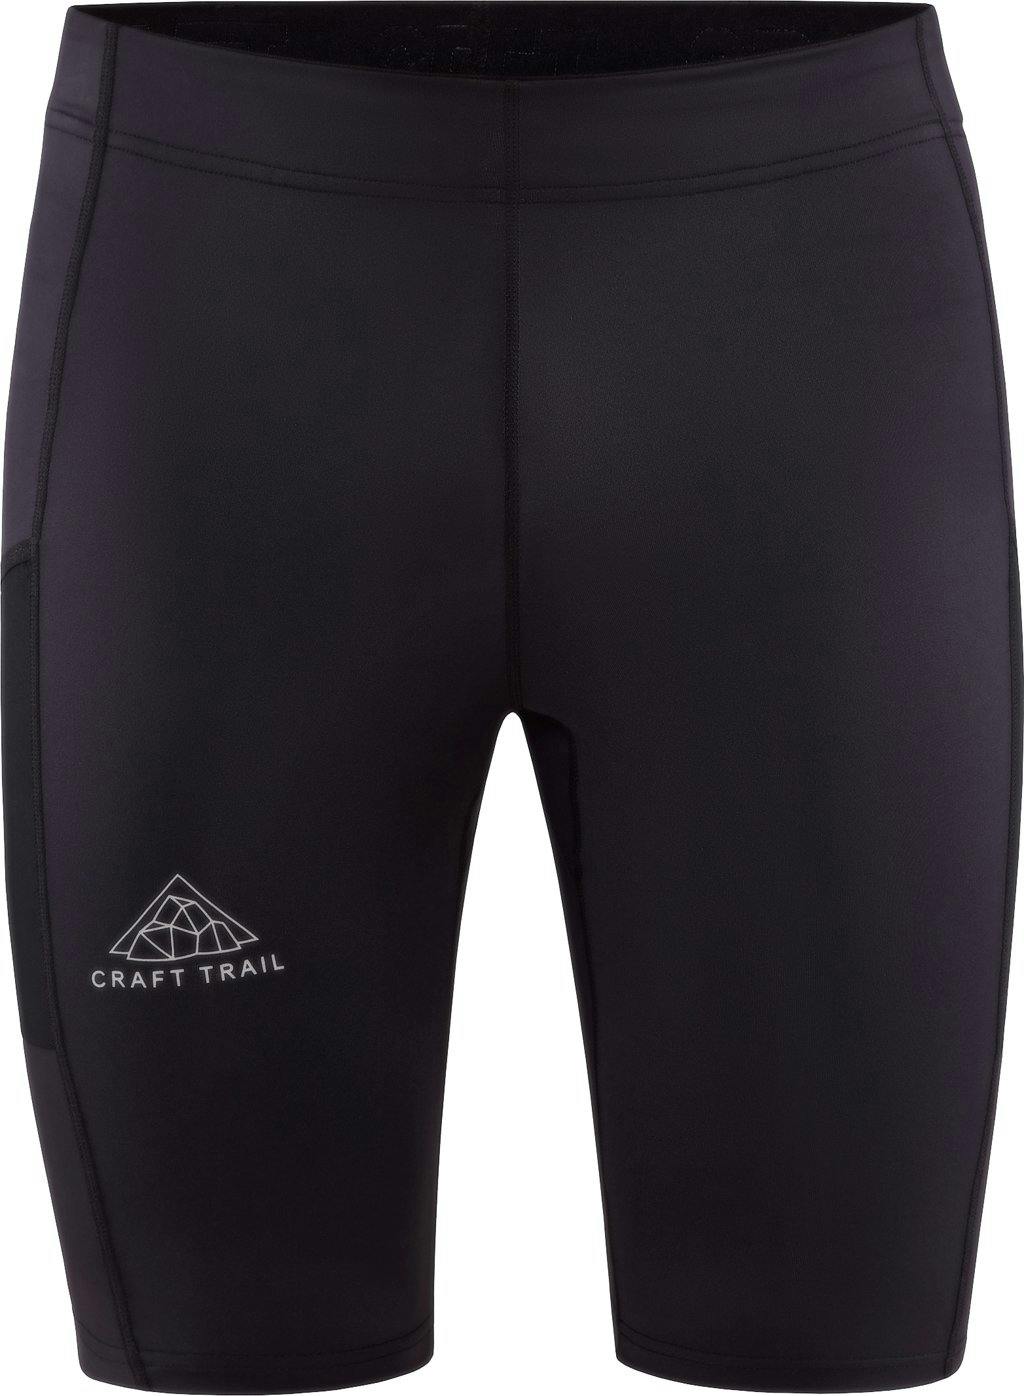 Product image for Pro Trail Short Tights - Men's